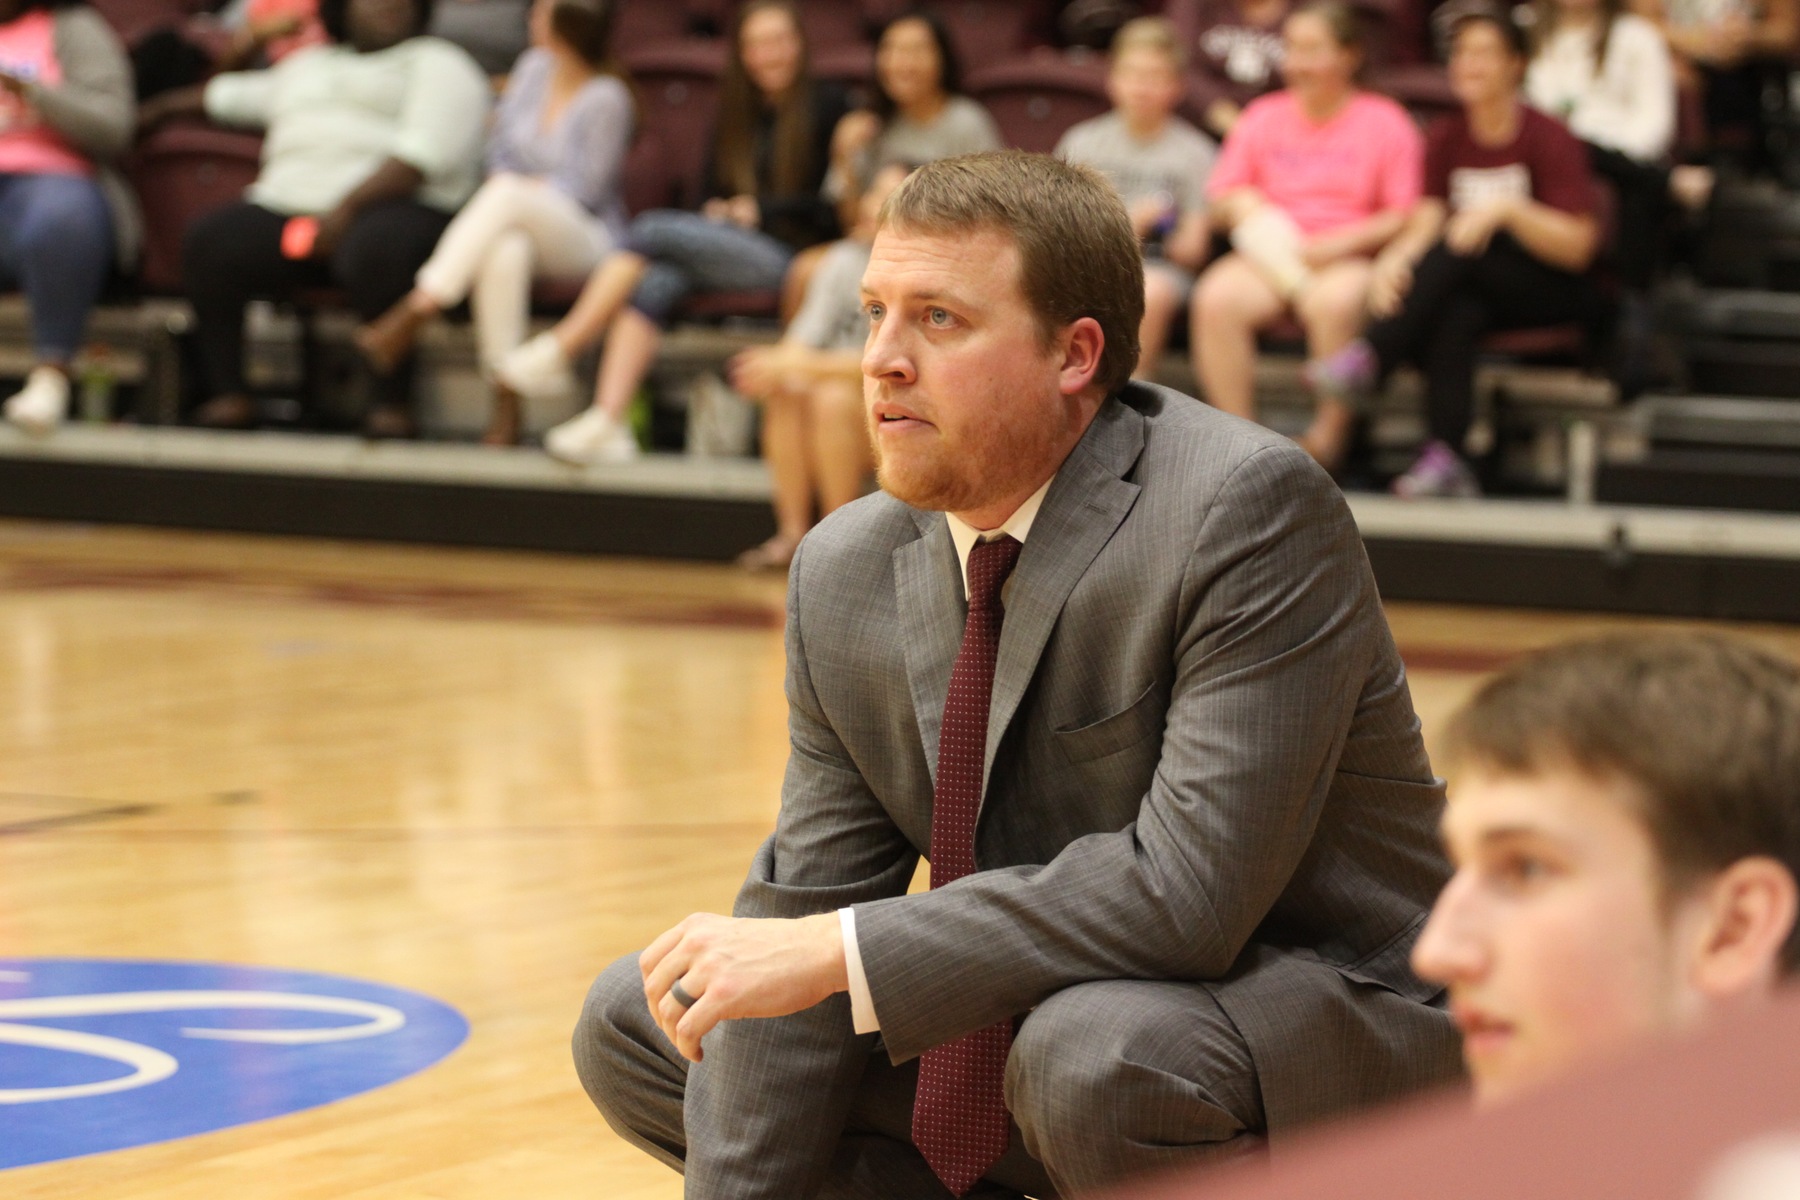 Southwestern Hires Connor Kuykendall as Men's Basketball Head Coach